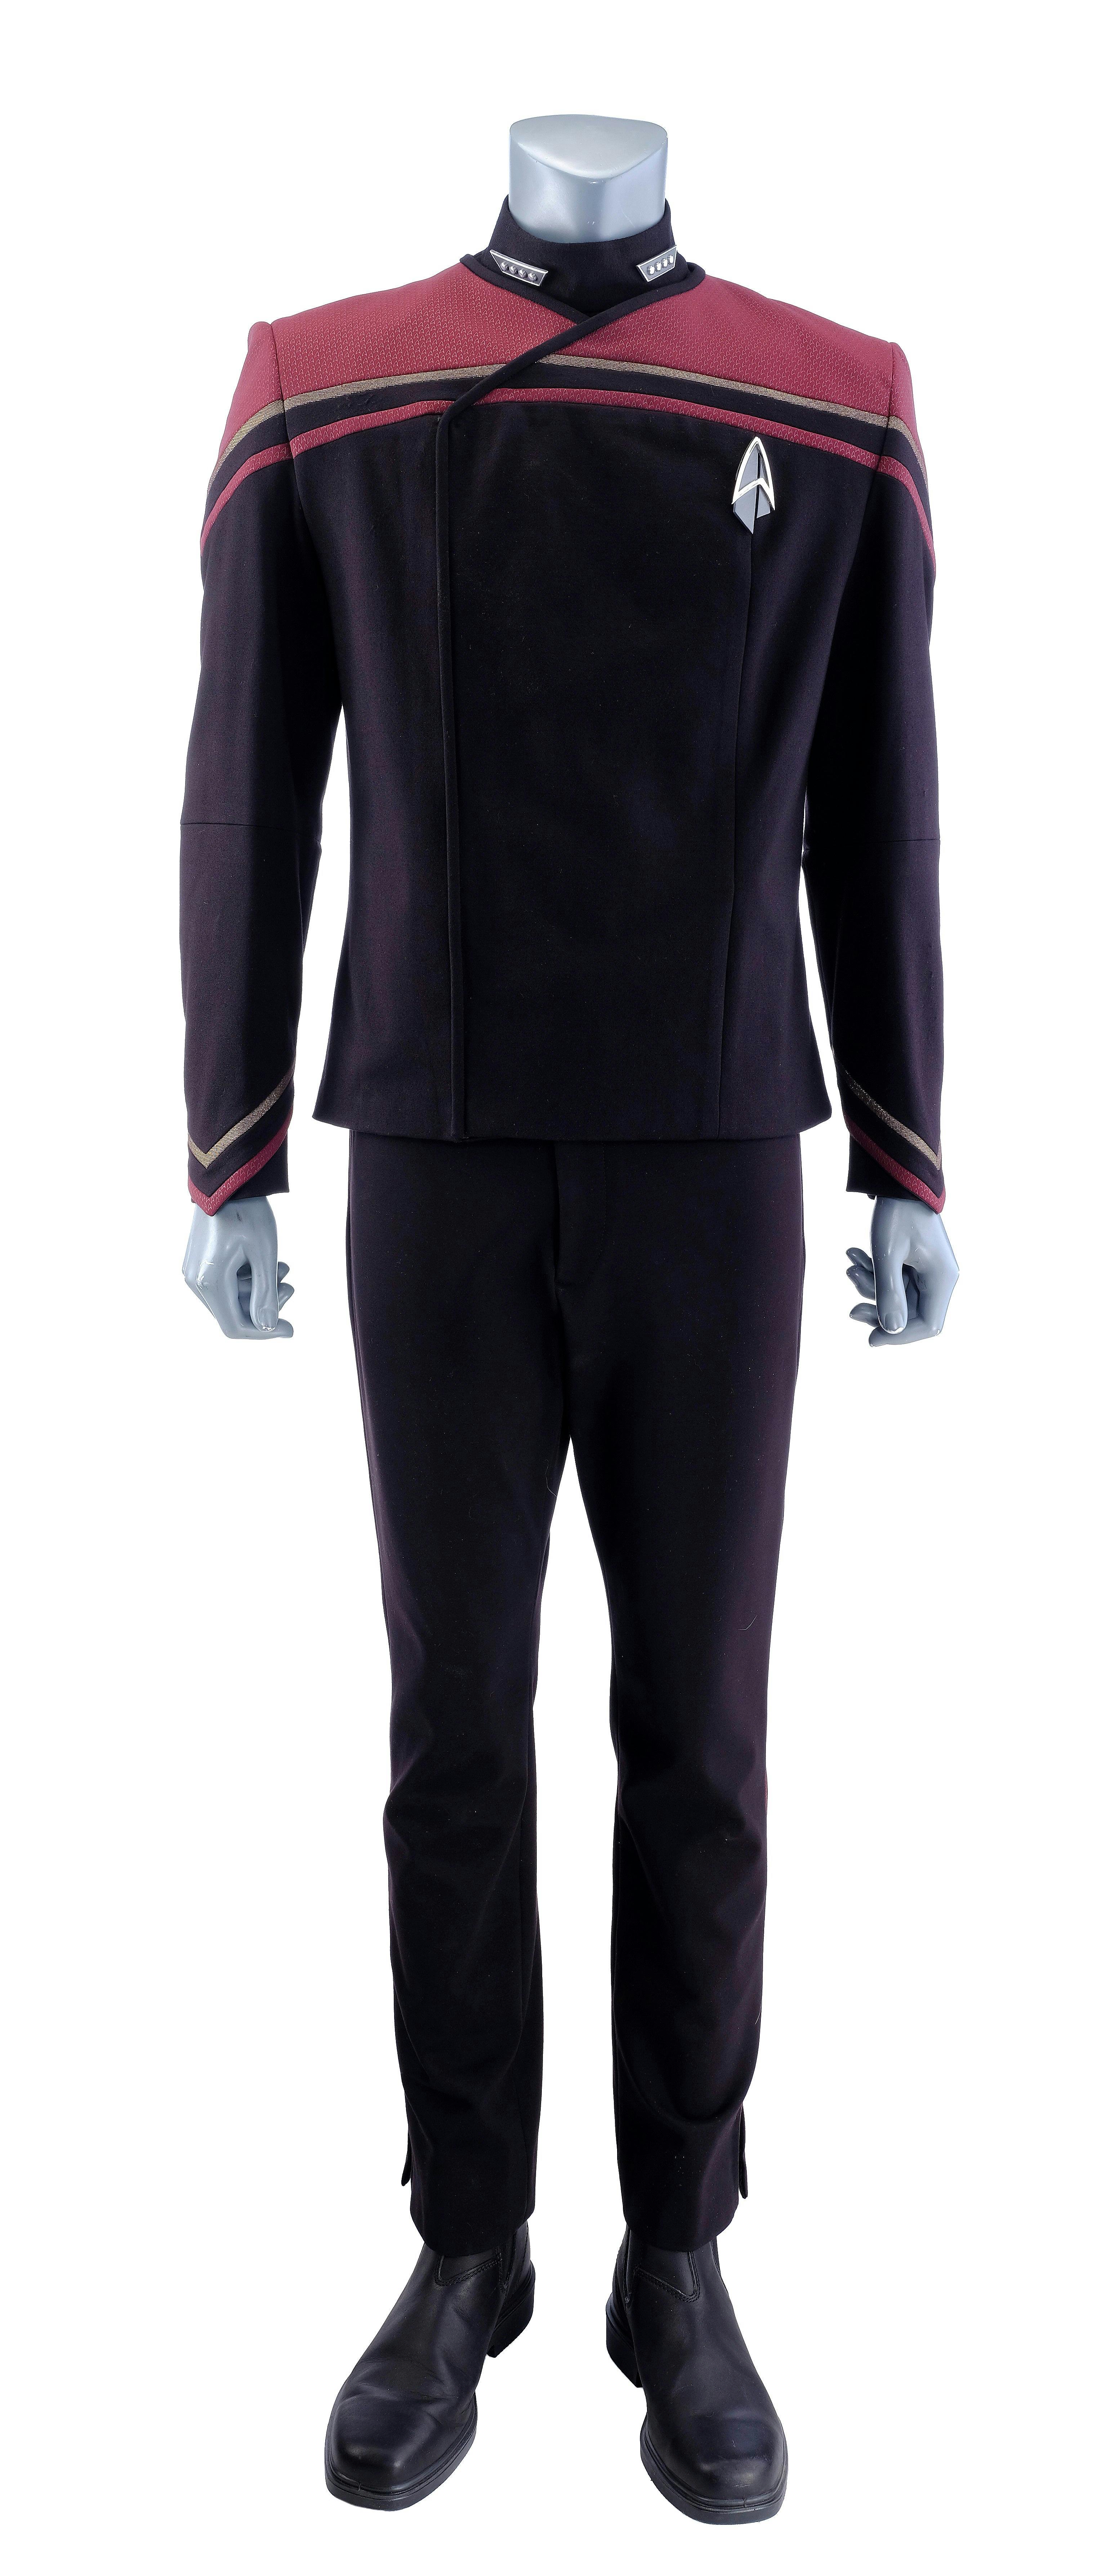 The stunt costume worn by Admiral Jean-Luc Picard in season two of Star Trek: Picard